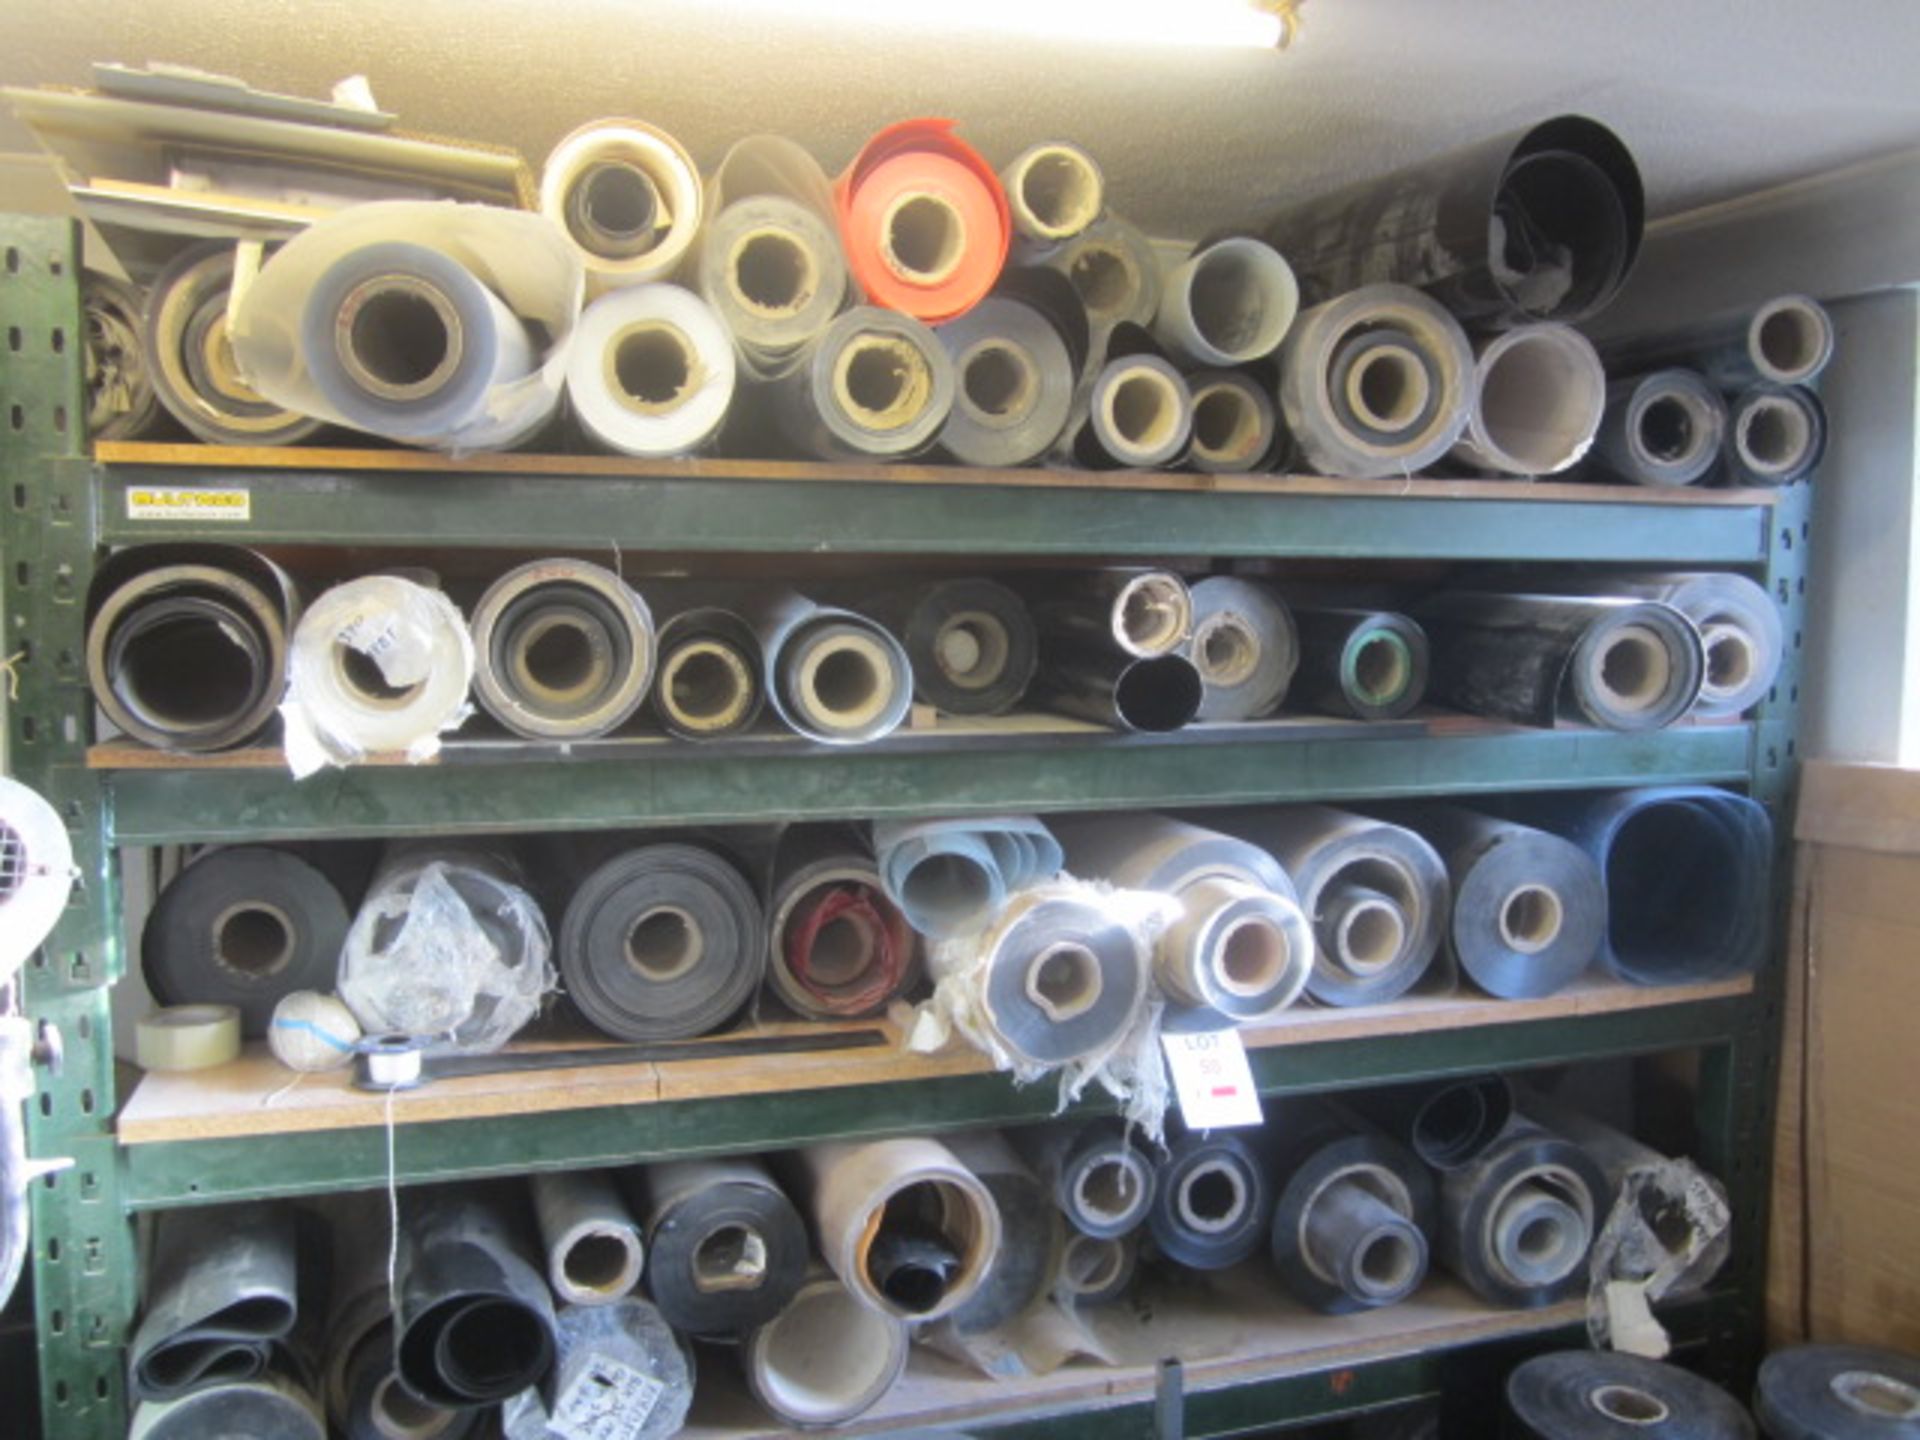 Assorted part reels of Apet film stock, approx. 85 - excluding racking. Located at Supreme